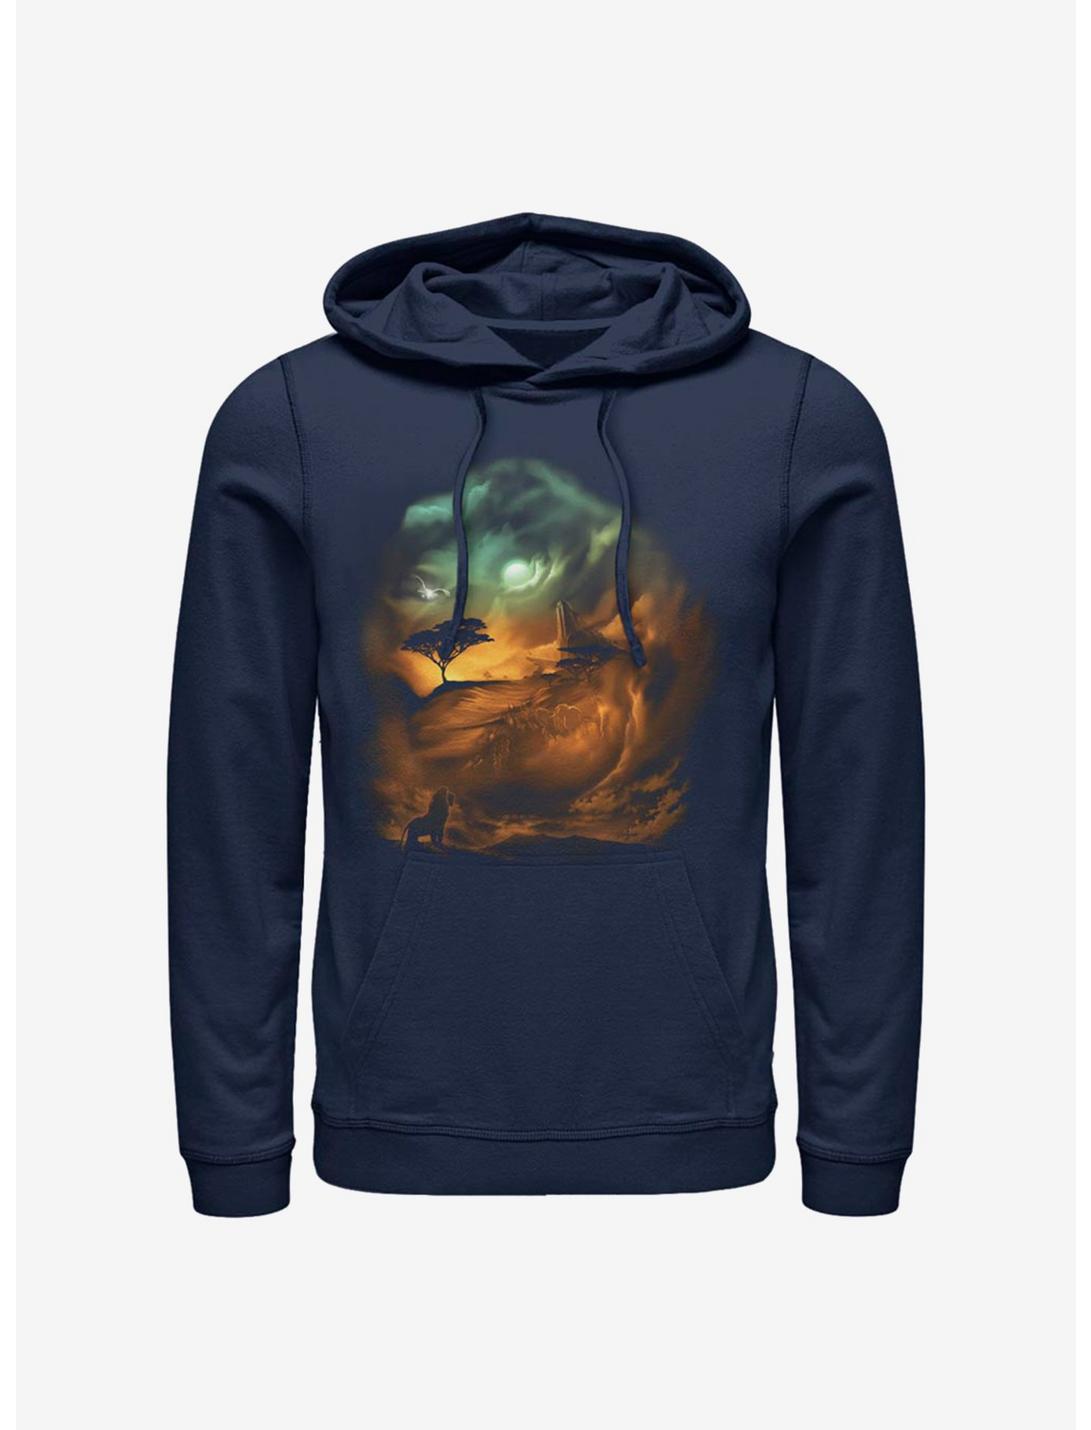 Disney The Lion King Birth Of A King Hoodie, NAVY, hi-res